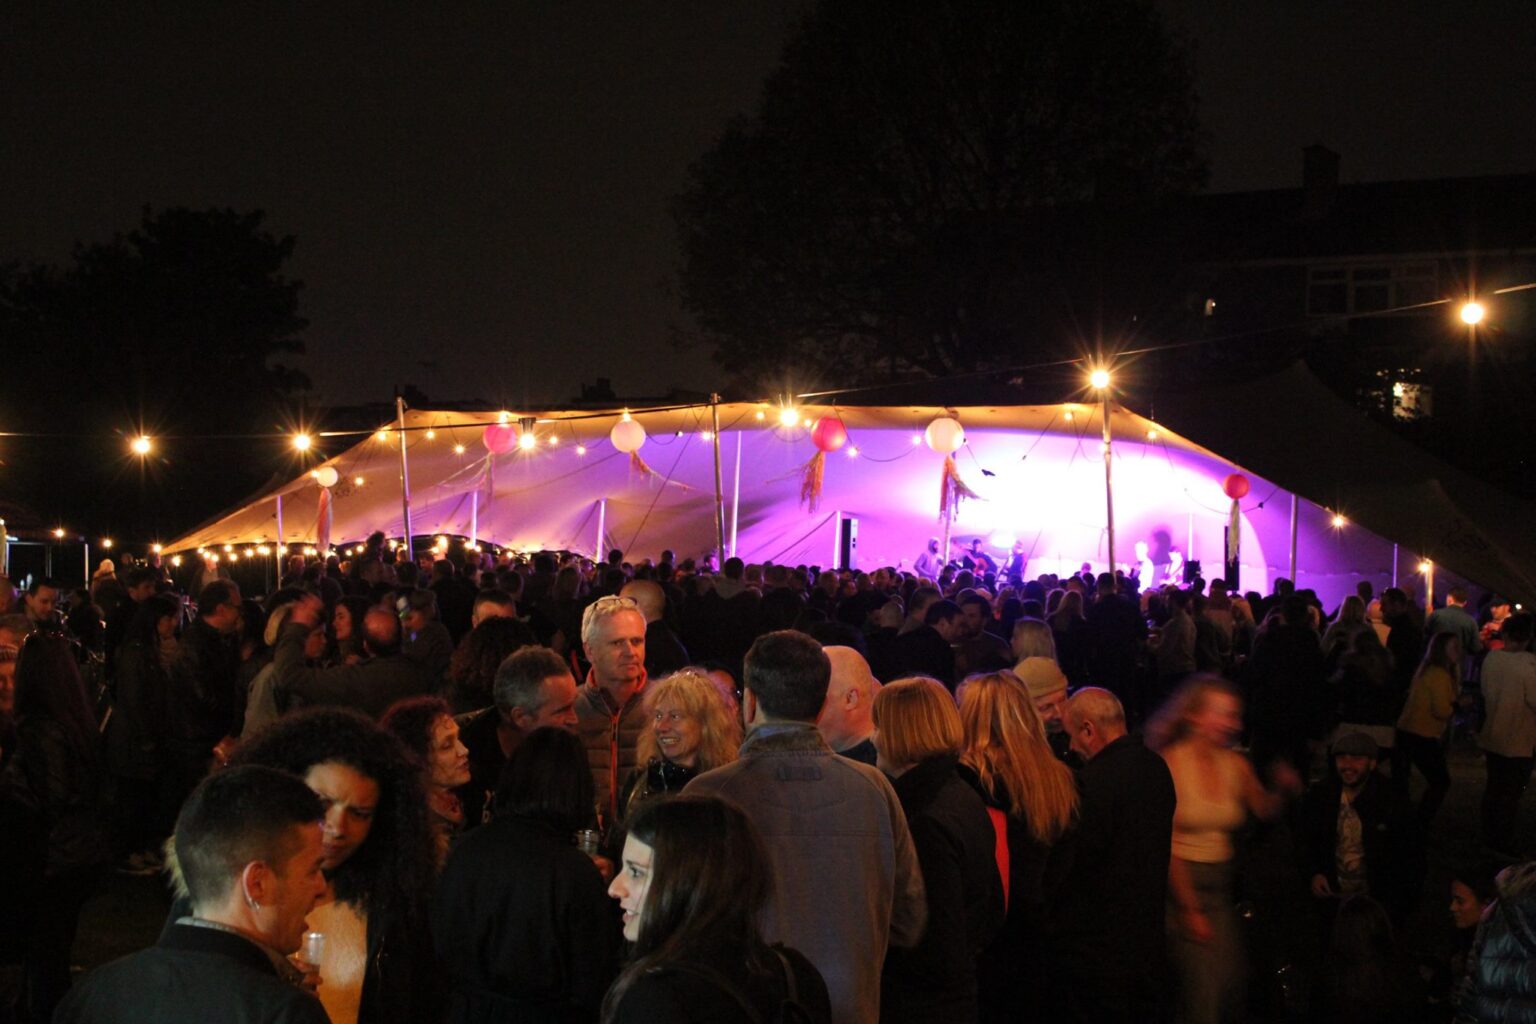 A tent staging live music at night, with the stage lit up against the darkness and the audience of people milling around